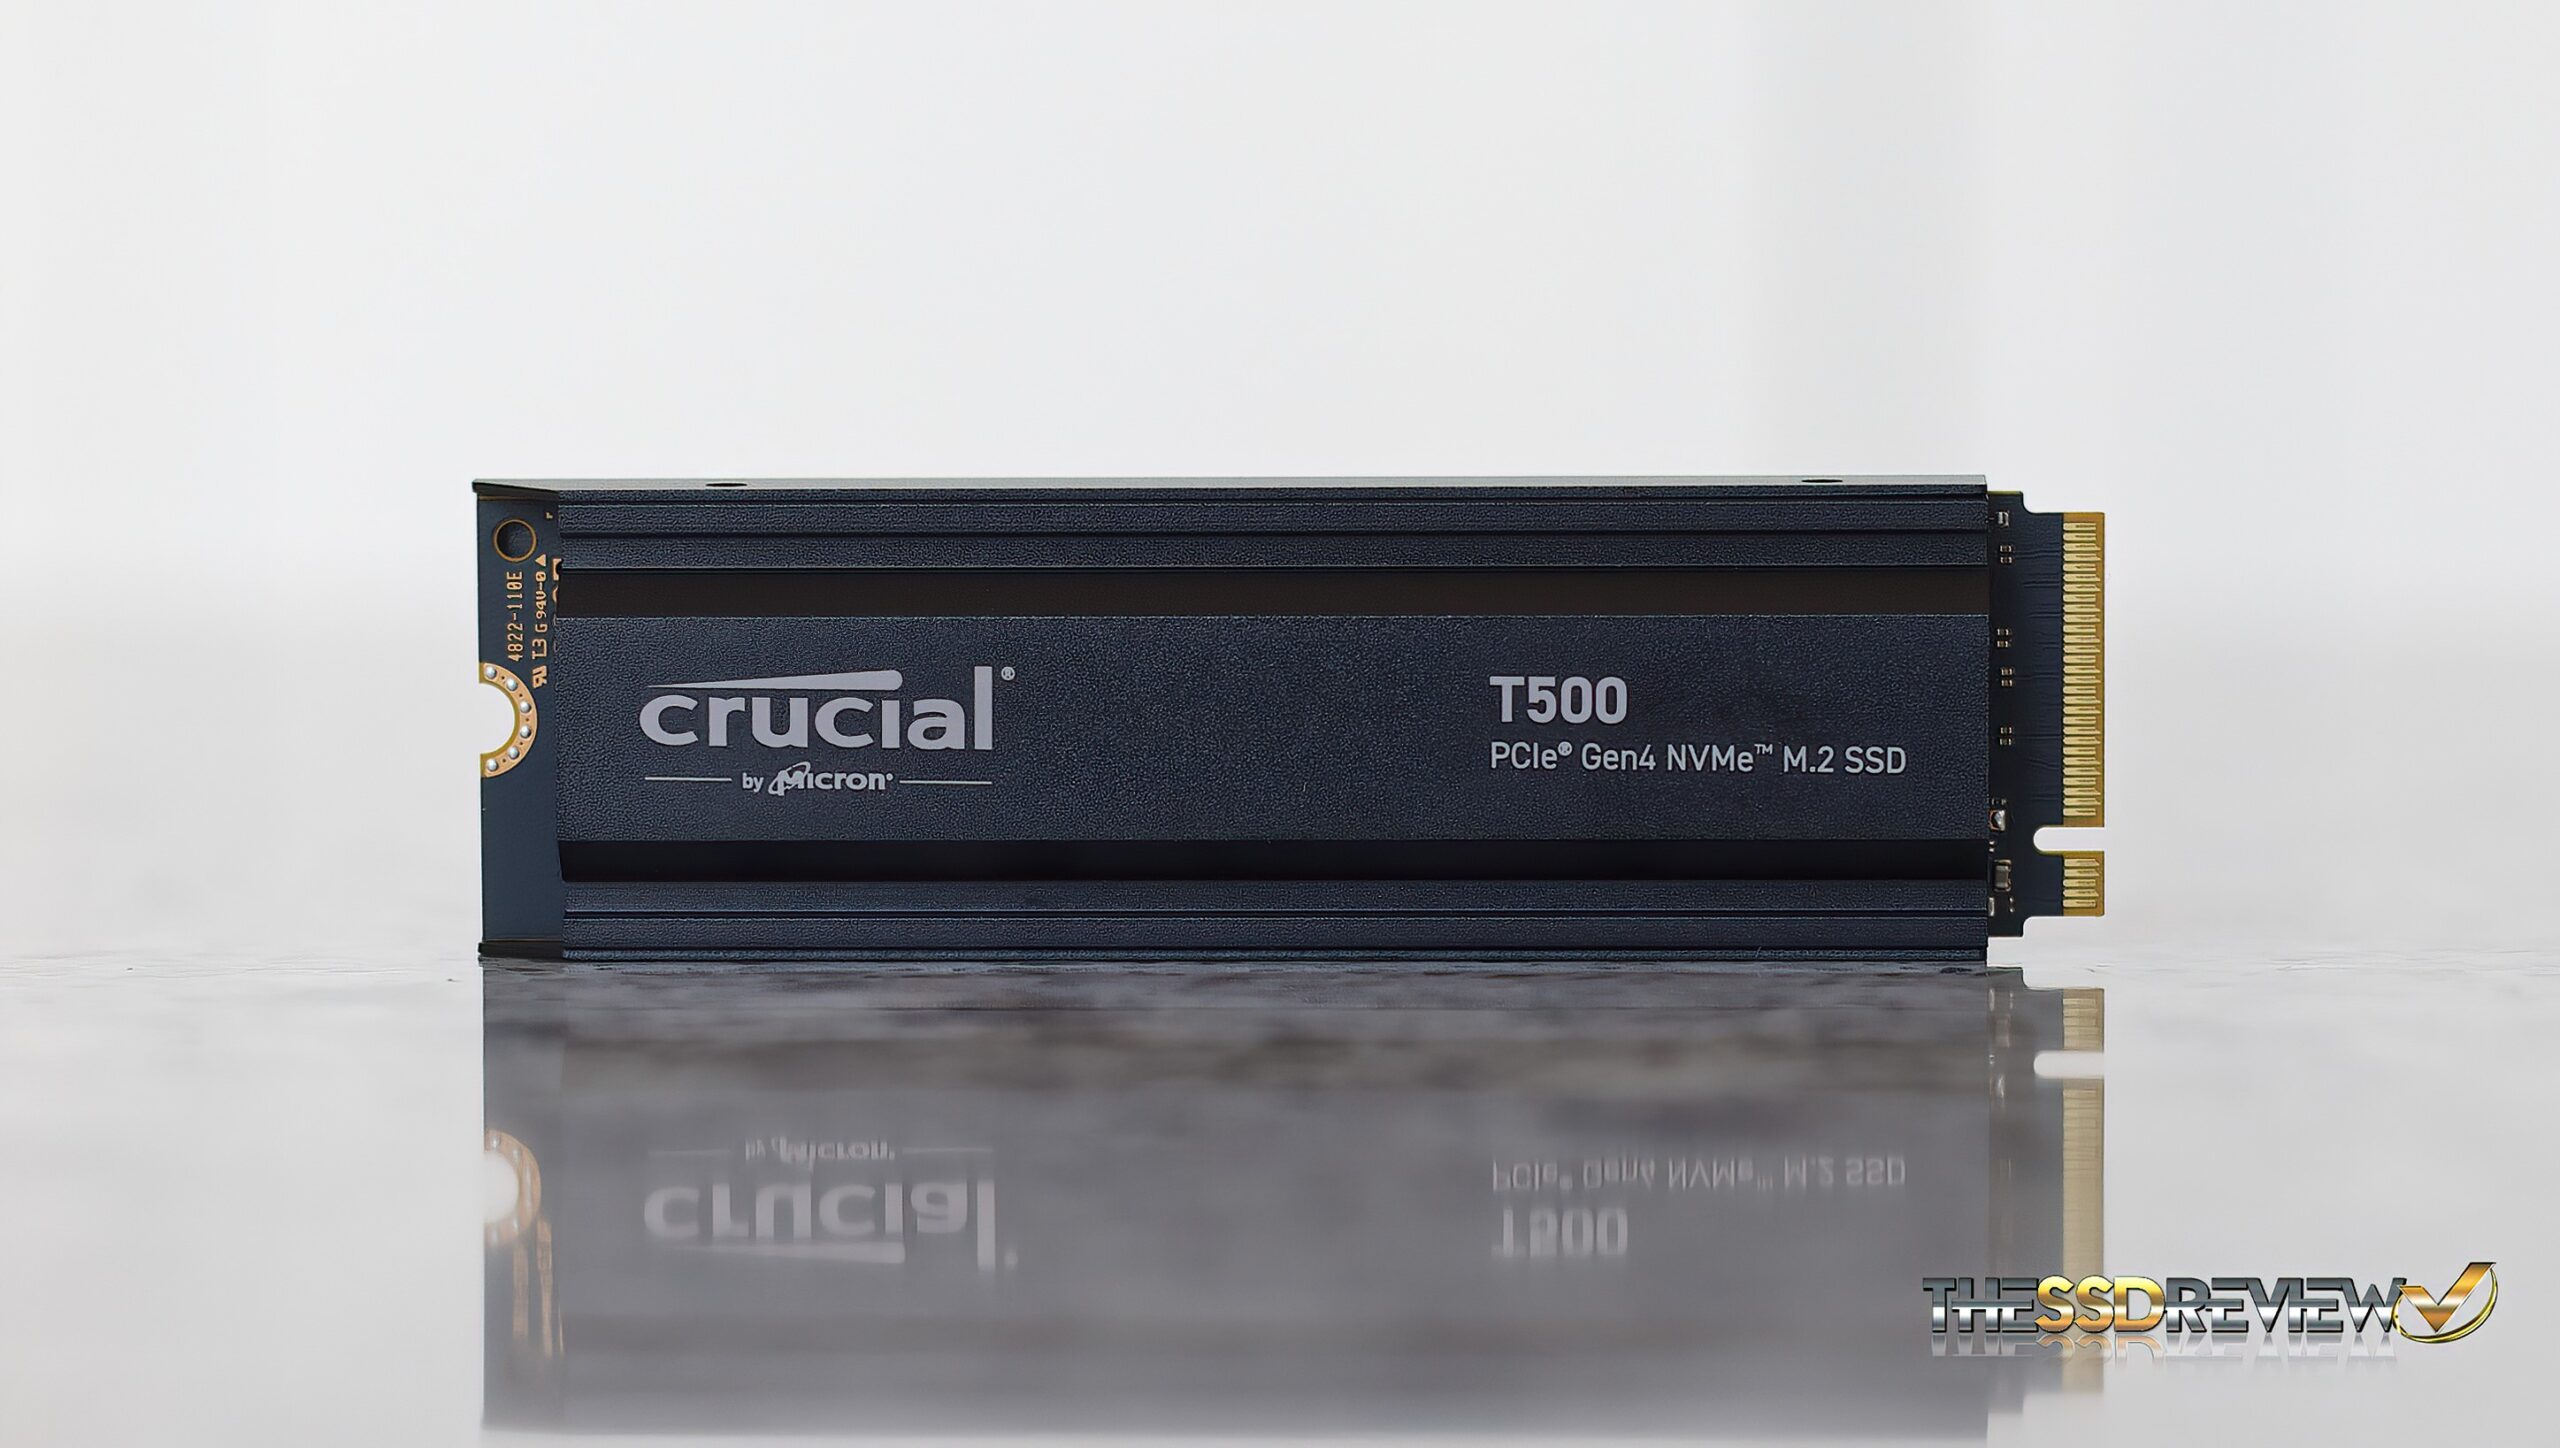 Crucial T500 Pro Gen4 2TB SSD Review - Move Over Expensive 8